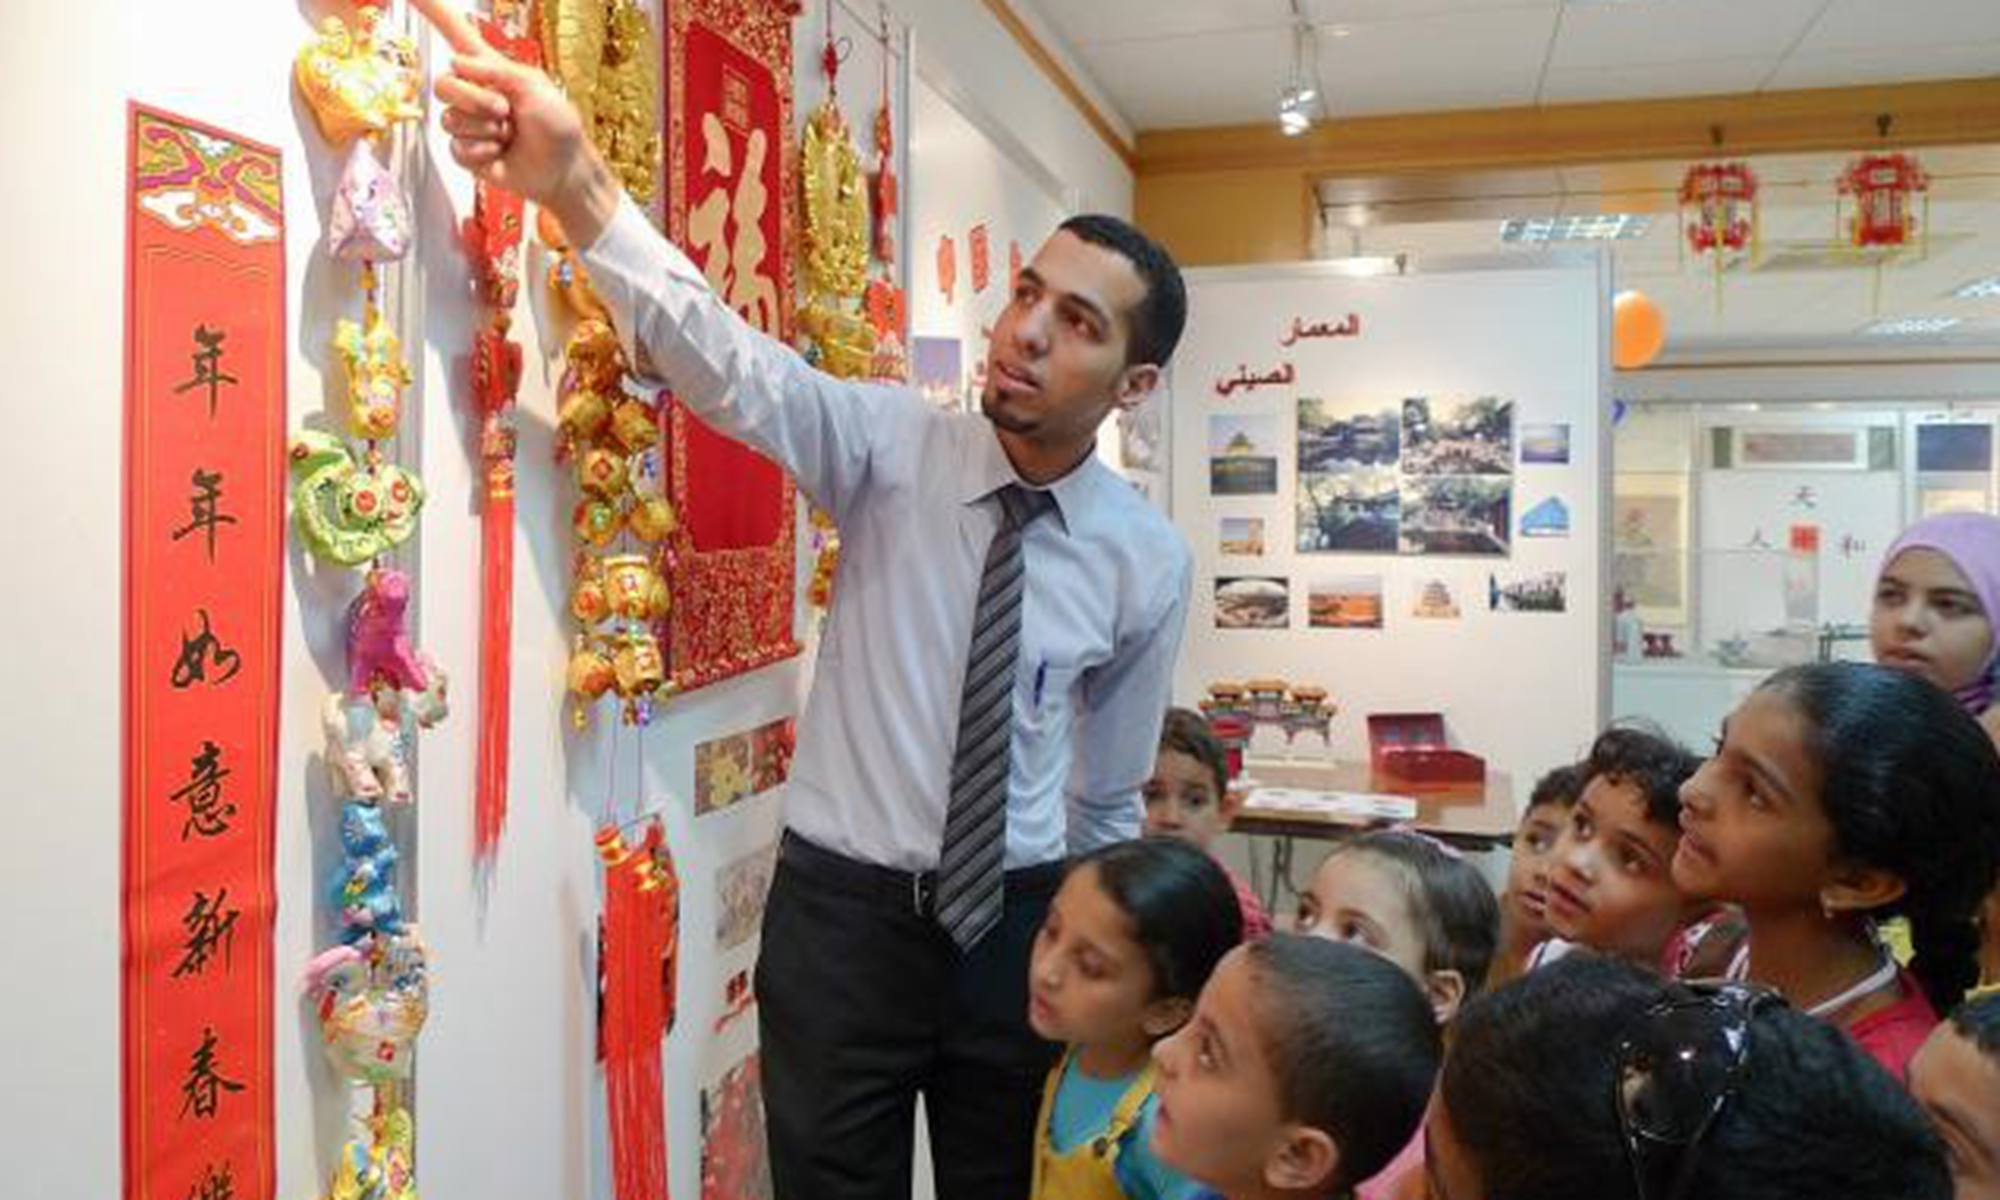 Abbas El-Said explains the 12 Chinese zodiac animals to local students at the China Cultural Center in Cairo, Egypt. This photo appeared on page 19 of the June 8, 2012 edition of People's Daily. (Photo: People's Daily)